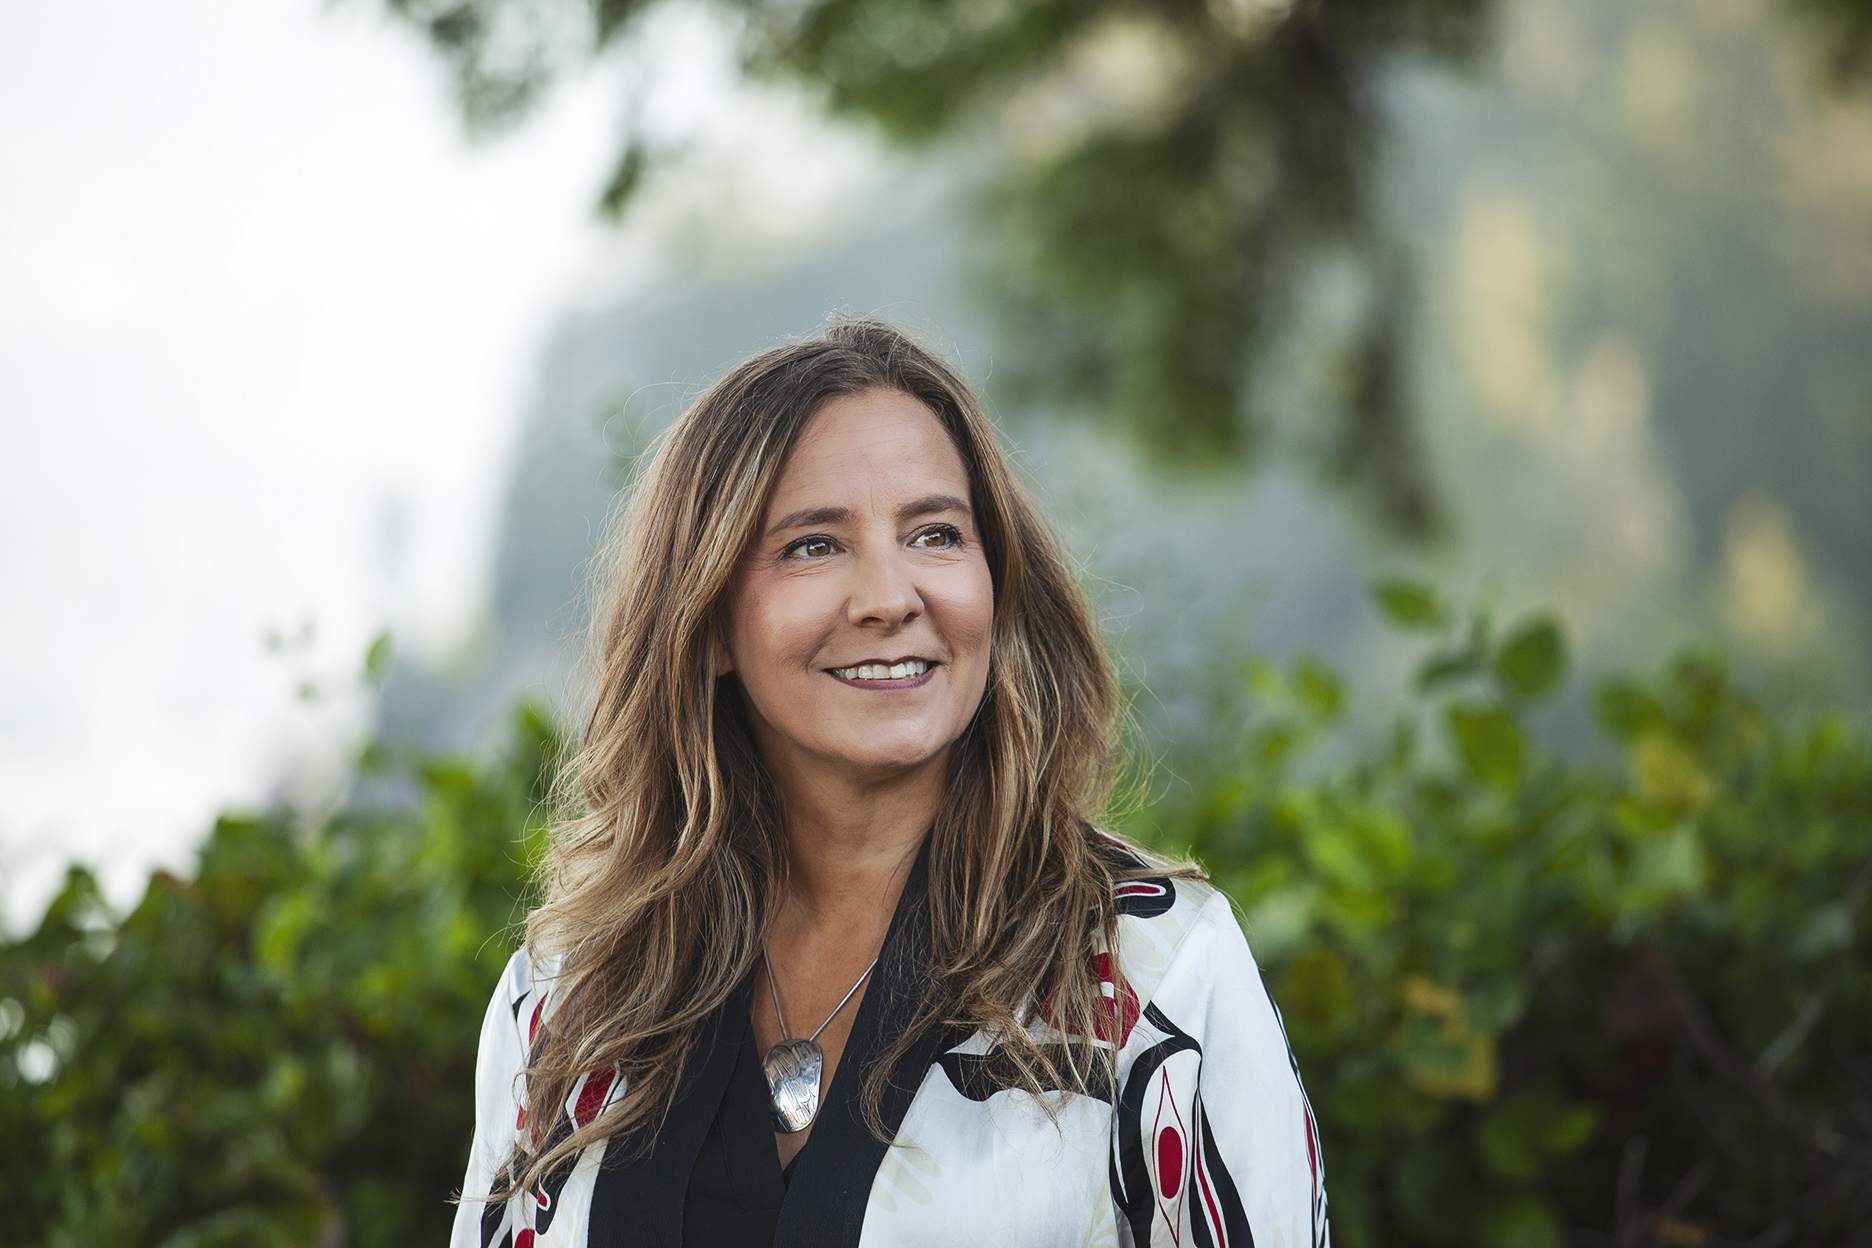 Teara Fraser stands in front of greenery, looking to the left of the camera. Teara is a Métis woman of Cree ancestry with long wavy brown hair. She is wearing a white, red, and black jacket over a black shirt and silver necklace with a silver pendant.